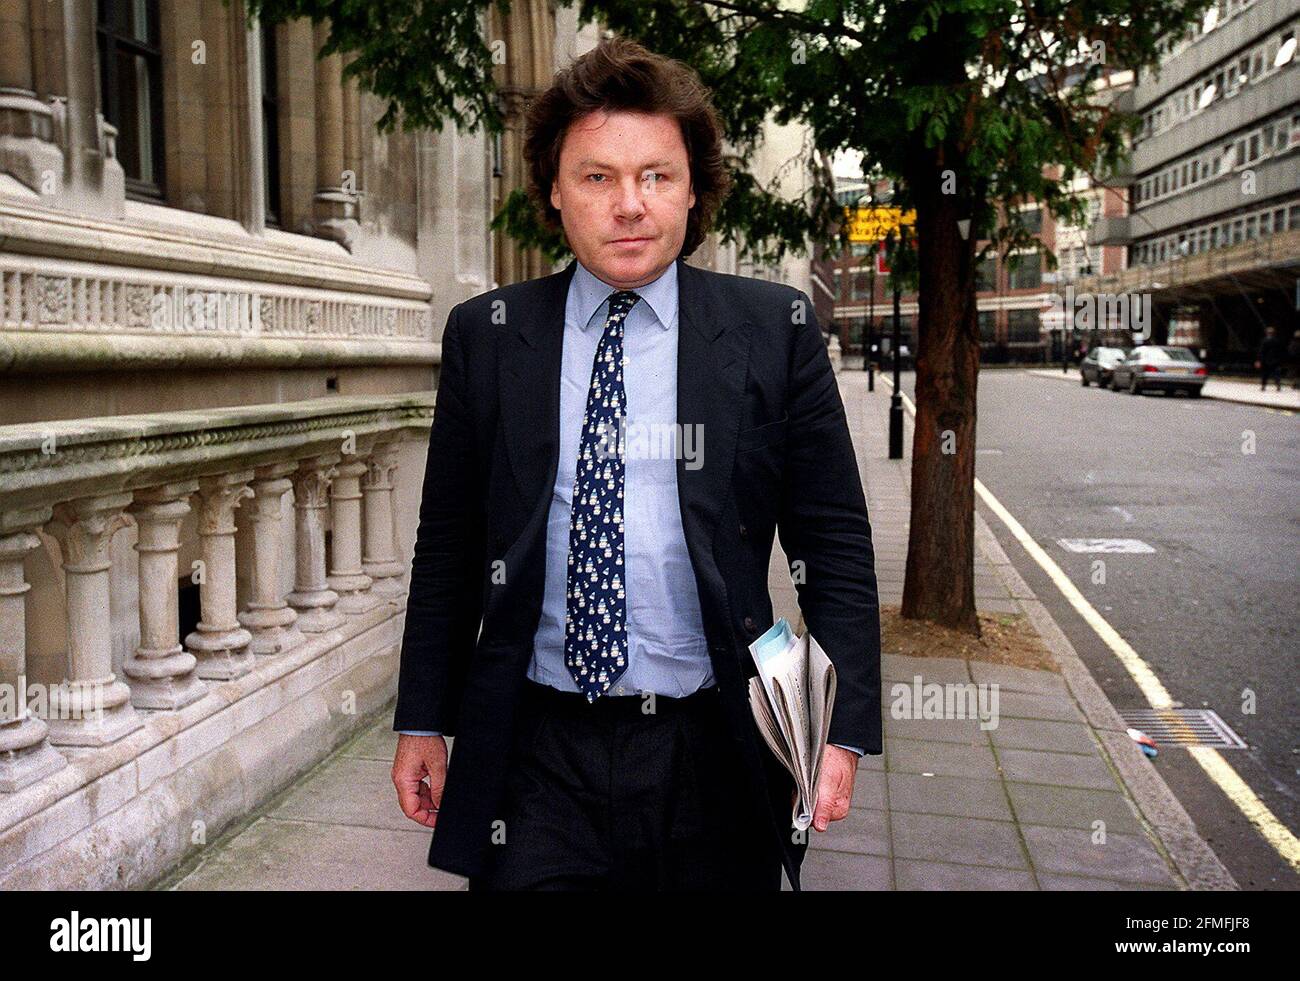 MP RUPERT ALLASON LEAVING THE HIGH COURT THIS AFTERNOON AFTER HIS CASE WAS THROWN OUT.16 October 2001 PHOTO ANDY PARADISE Stock Photo